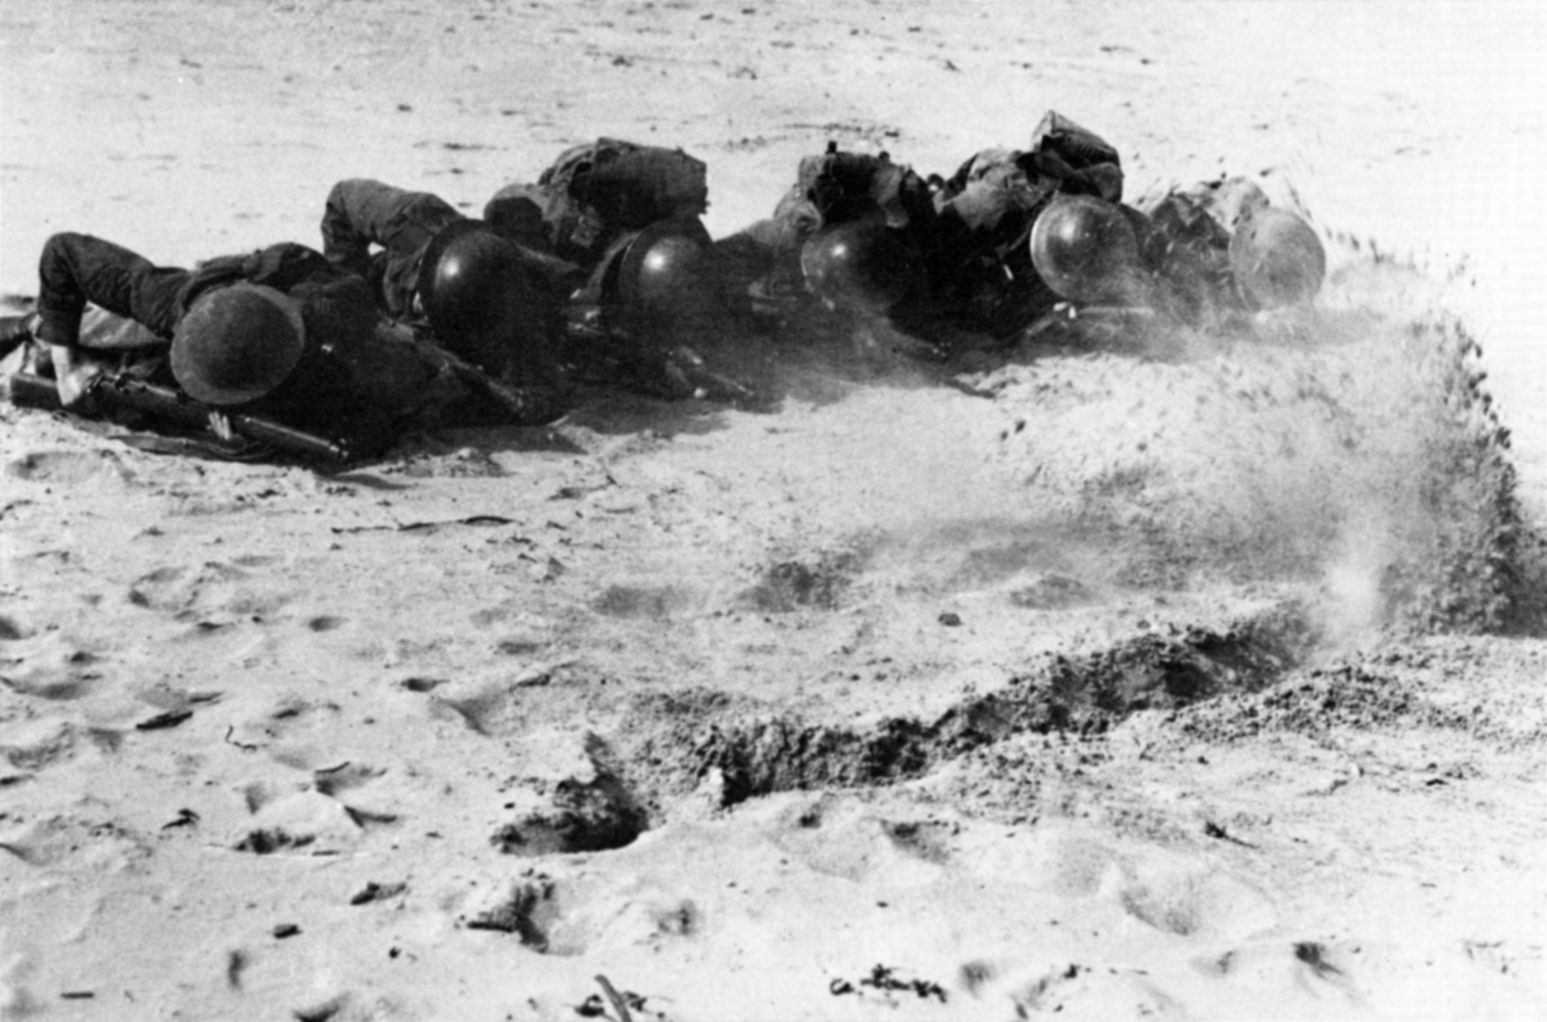 Commandos crawl through bullet-ridden sand during a training exercise at the Commando Training Center at Achnacarry, Scotland. Father Basil first met the Rangers when they arrived at the center in 1942.